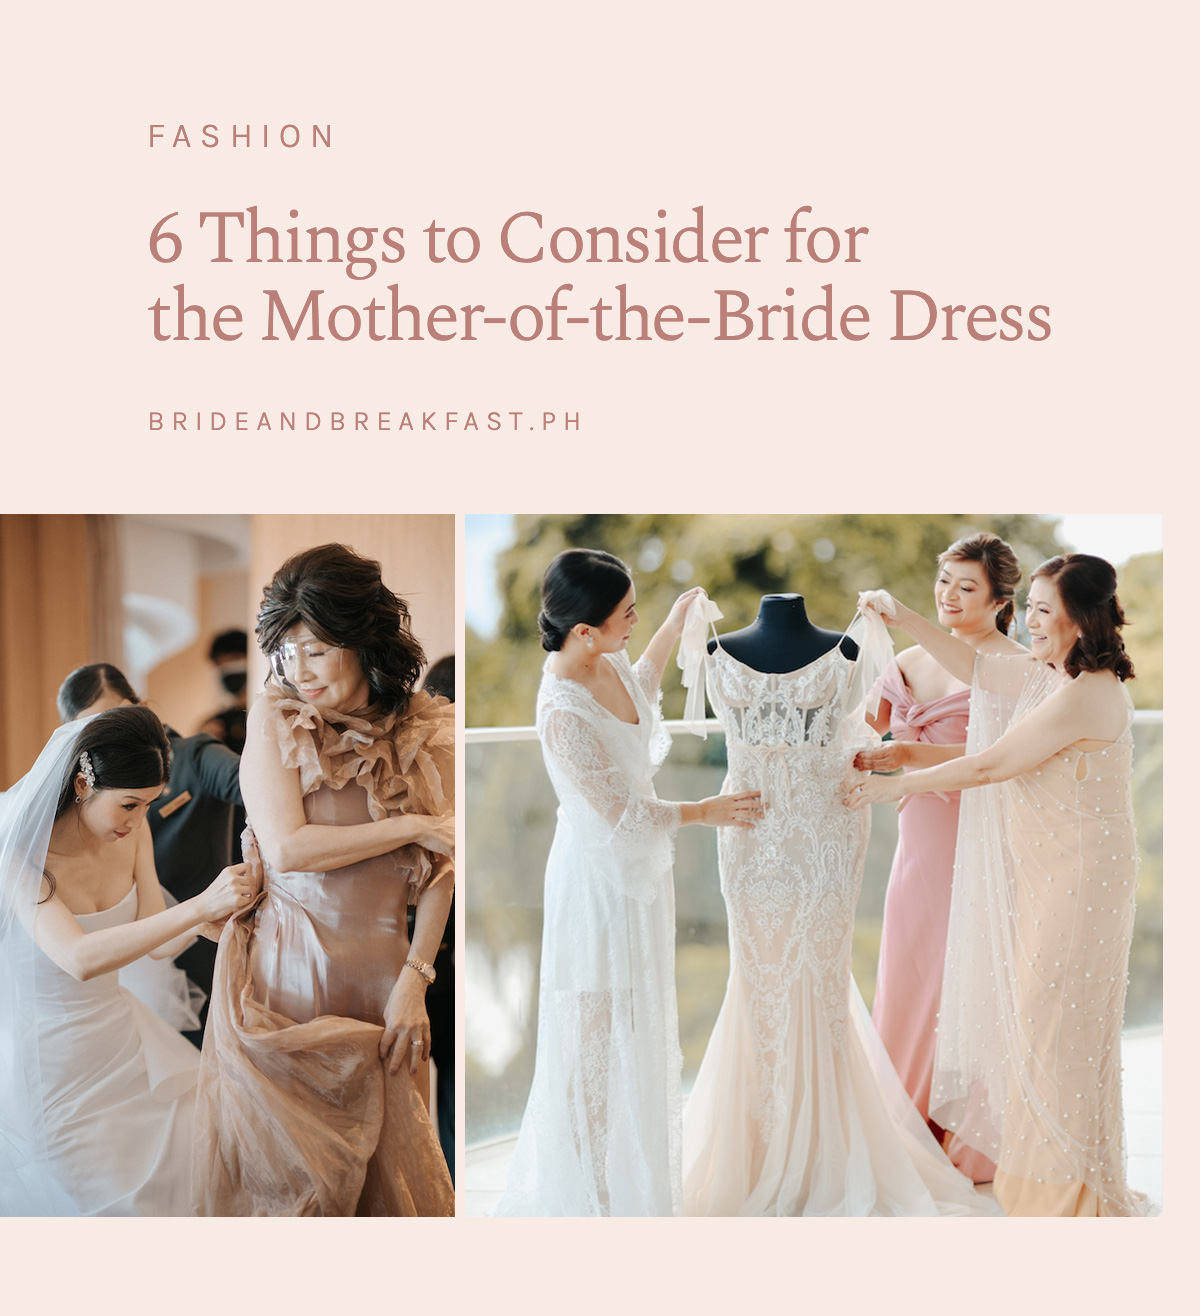 6 Things to Consider for the Mother-of-the-Bride Dress